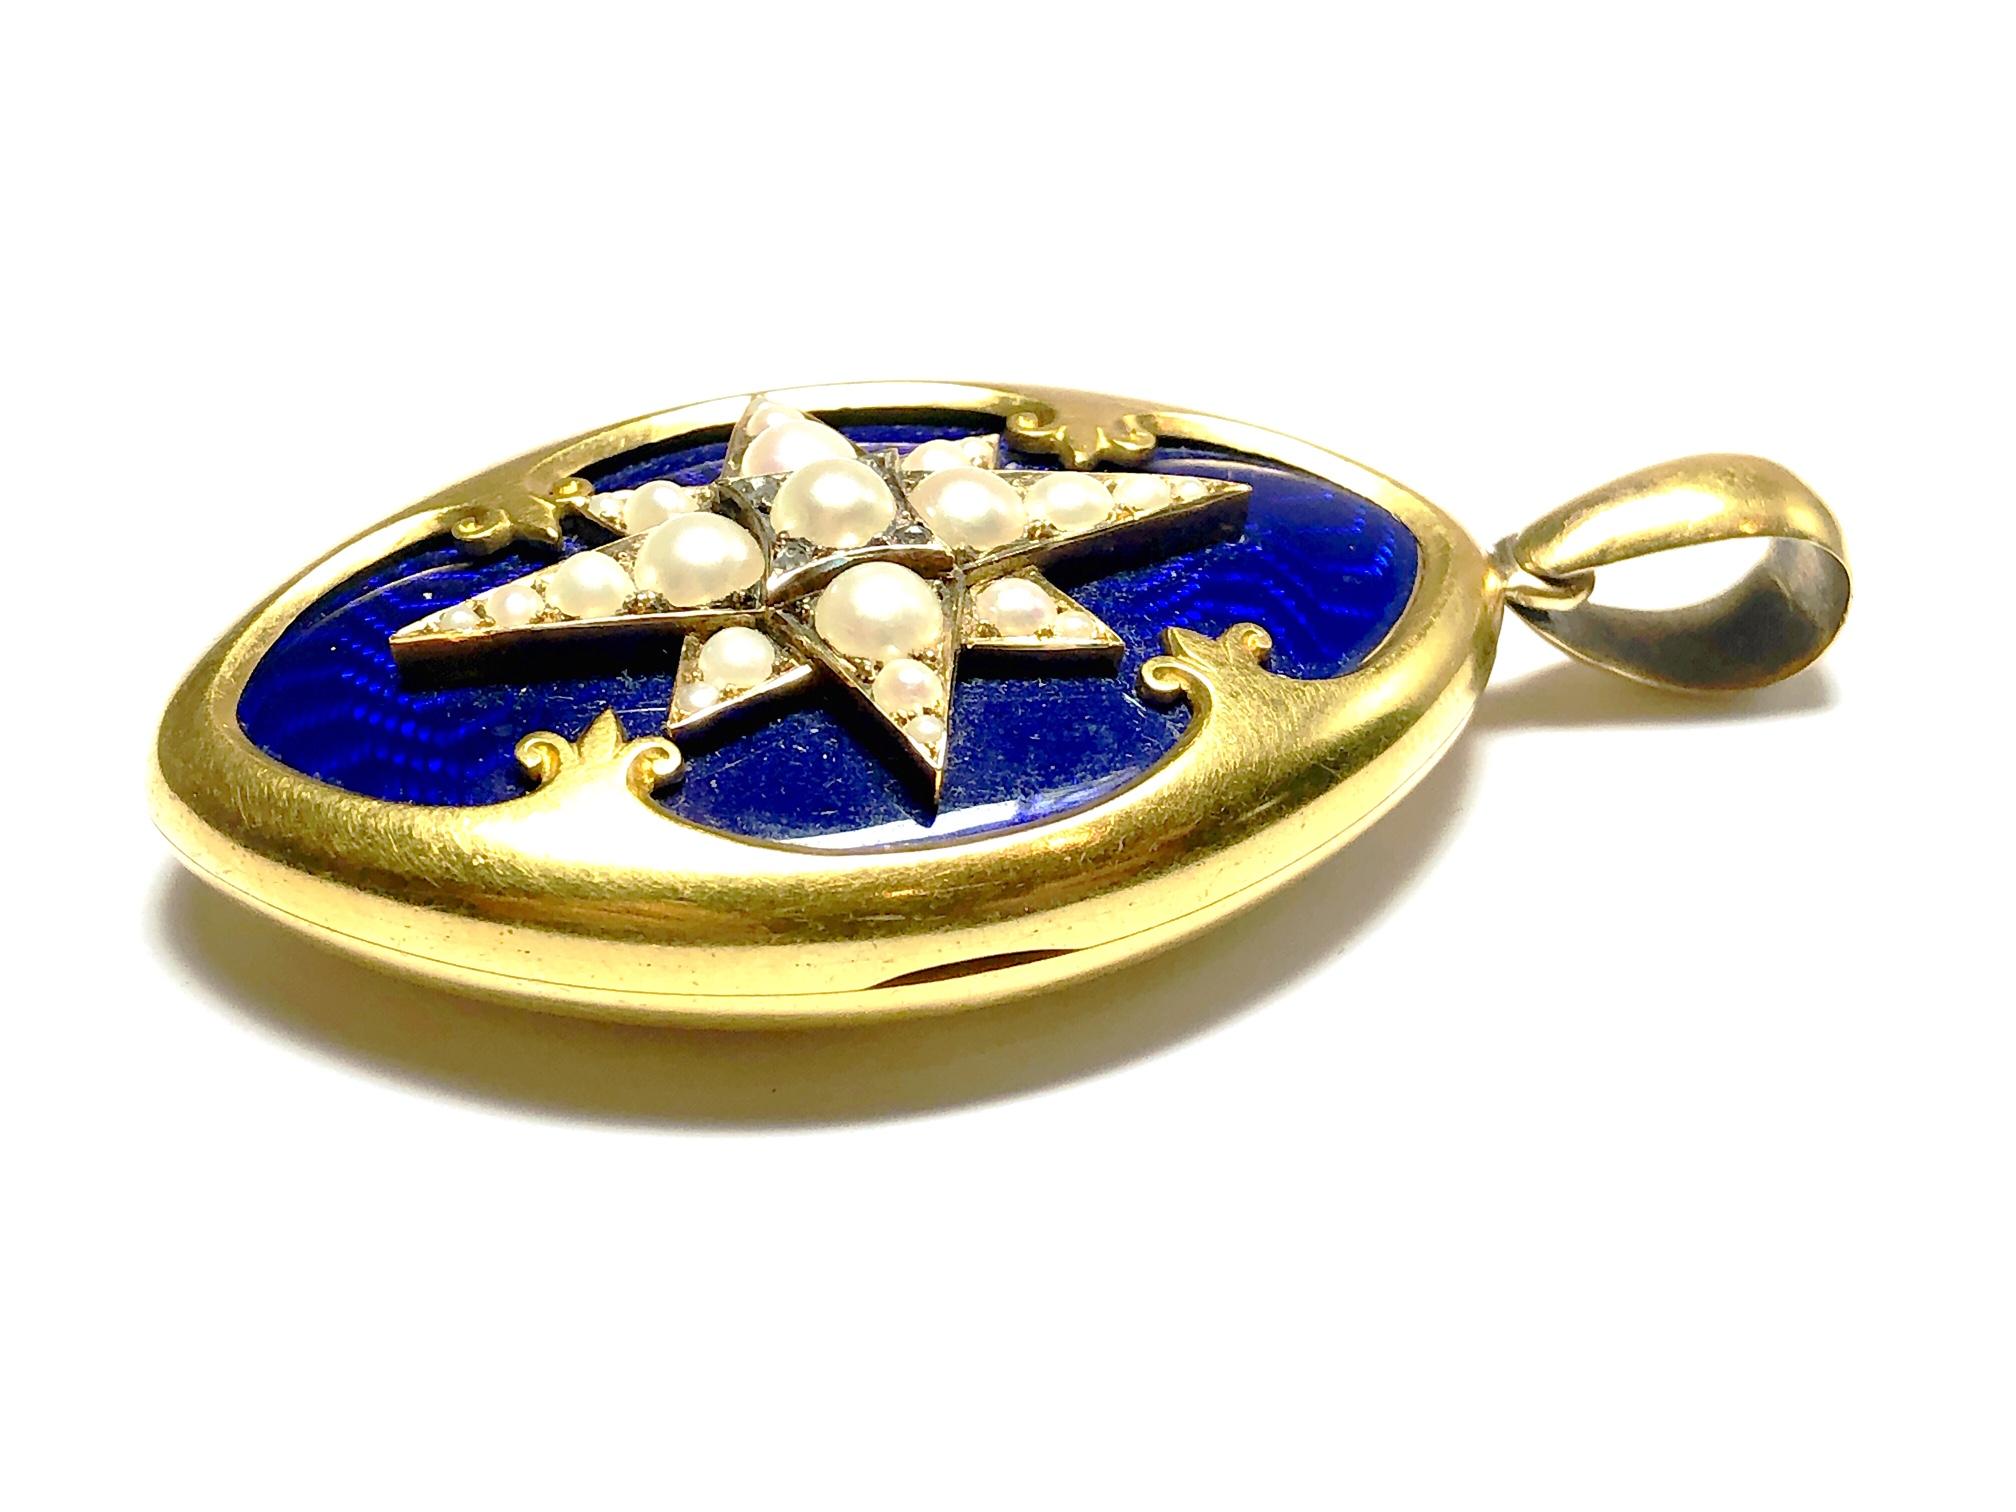 Rose Cut Victorian Blue Enamel, Pearl and Gold Locket, Dated 1874